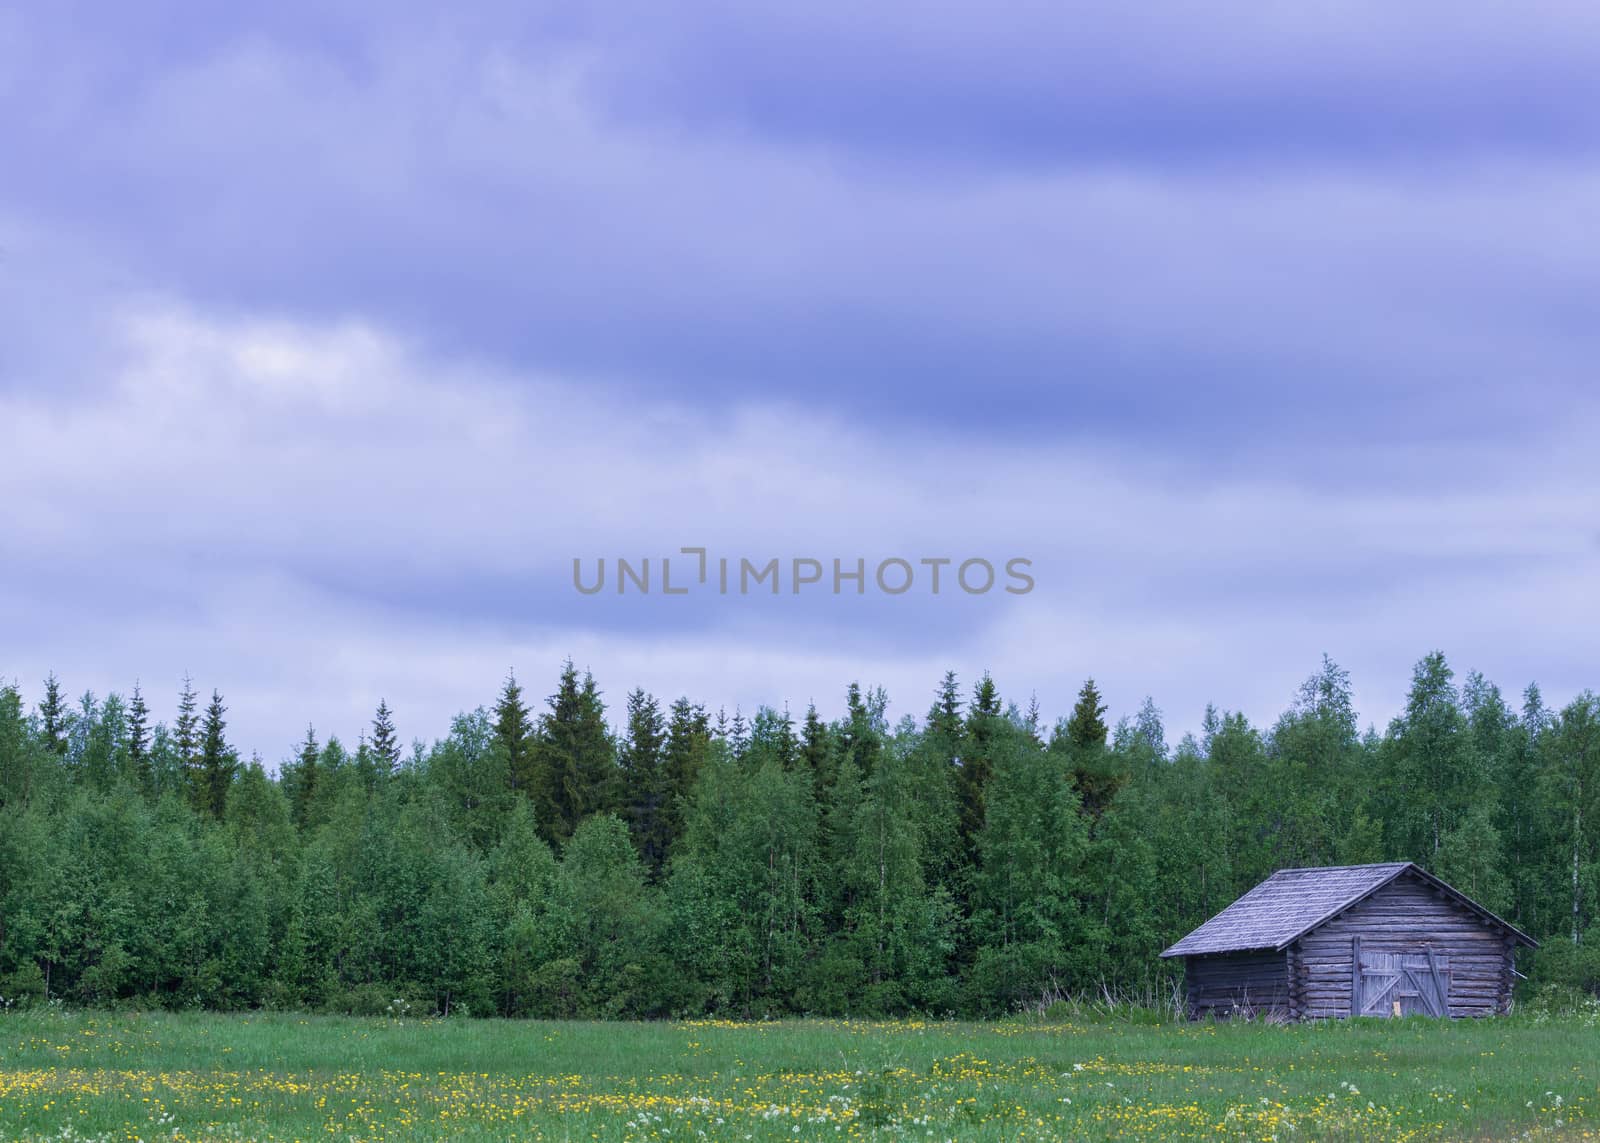 Lapland In Summer: barn on green field with flowers. by Claudine